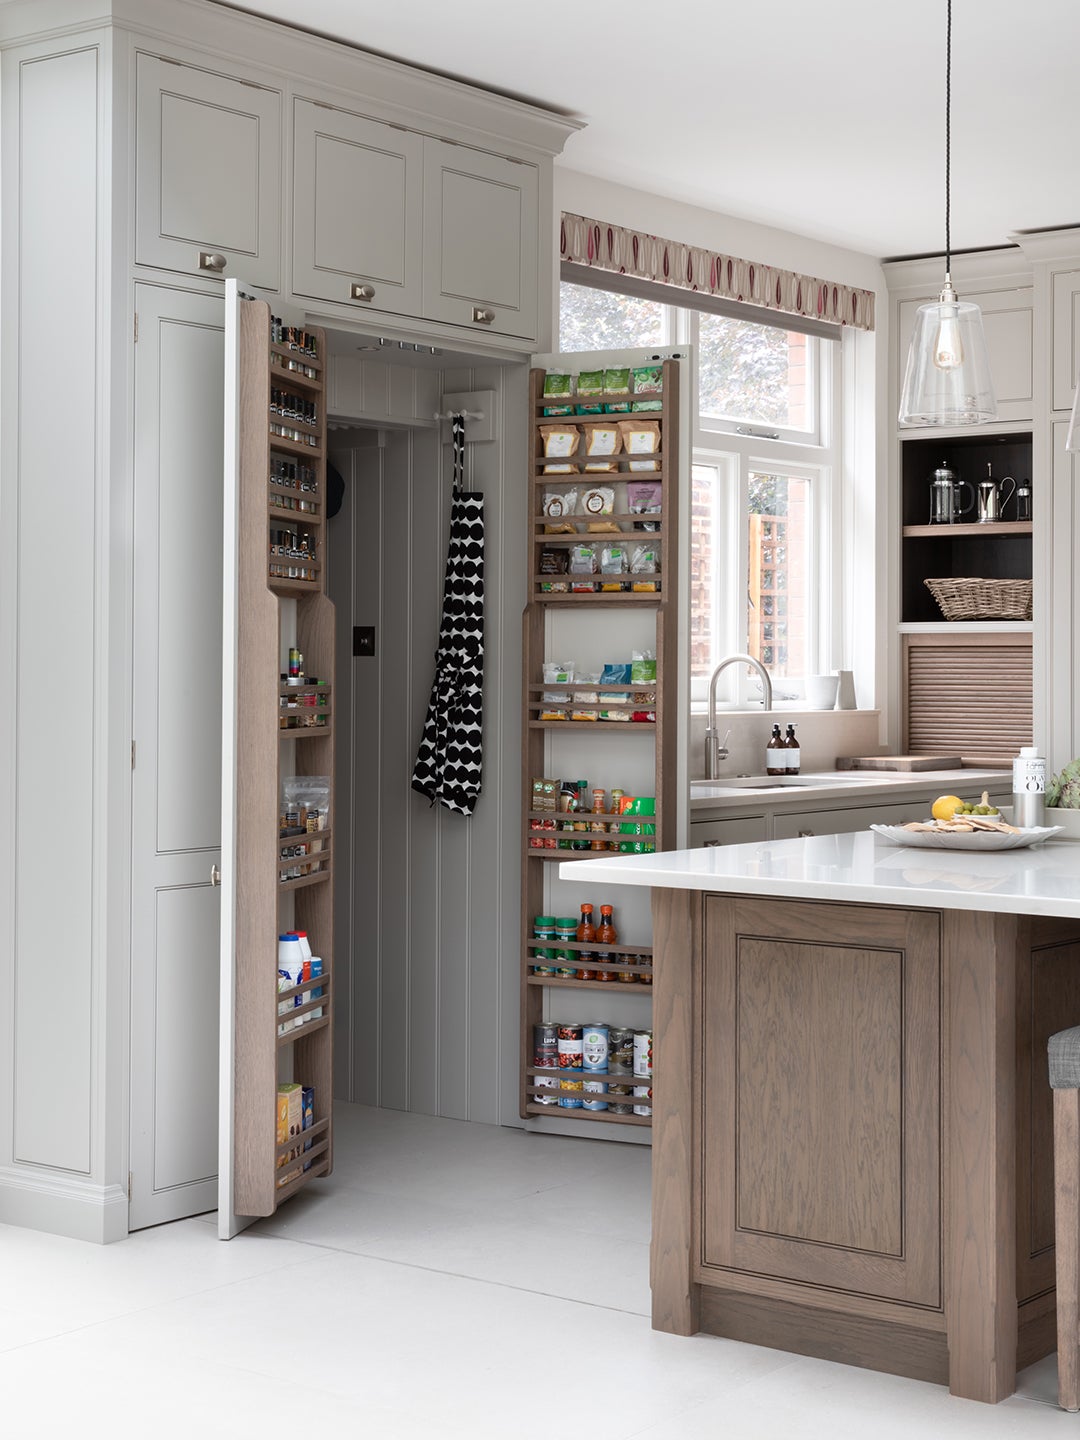 The Best Walk In Pantry Organization Ideas Are Hiding in Plain Sight